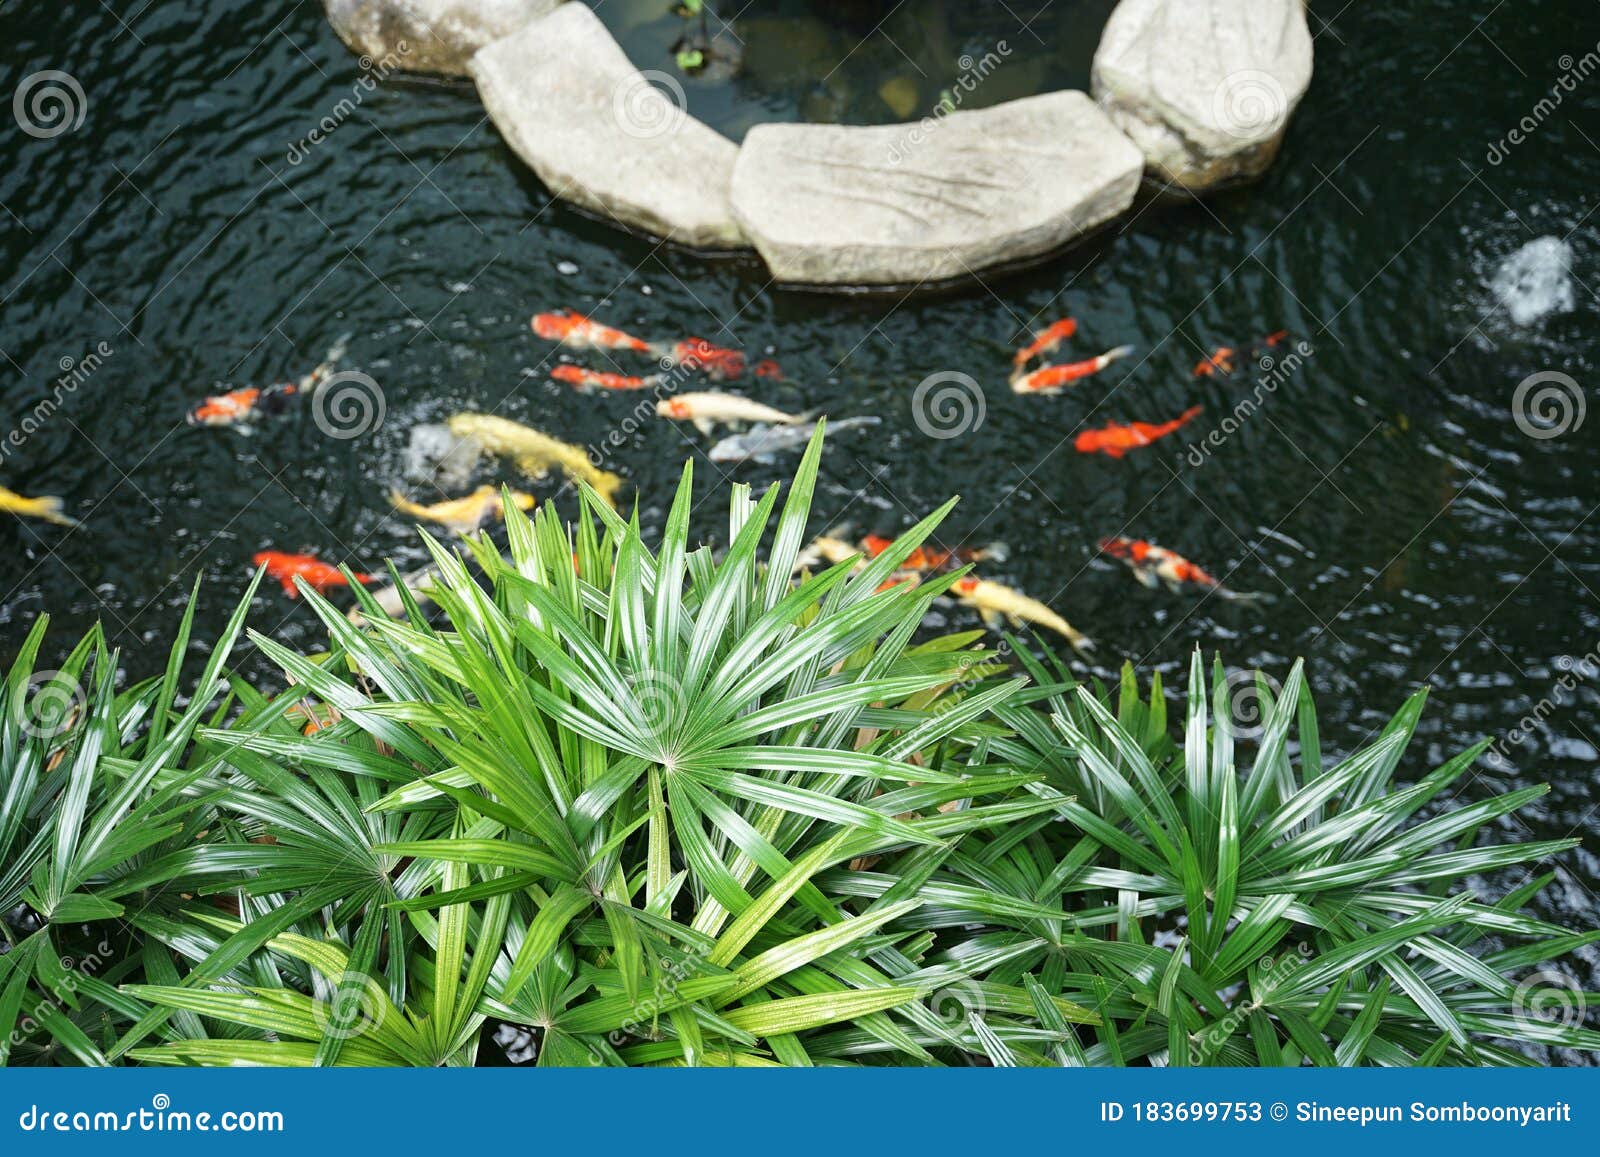 outdoor tropical fish pond